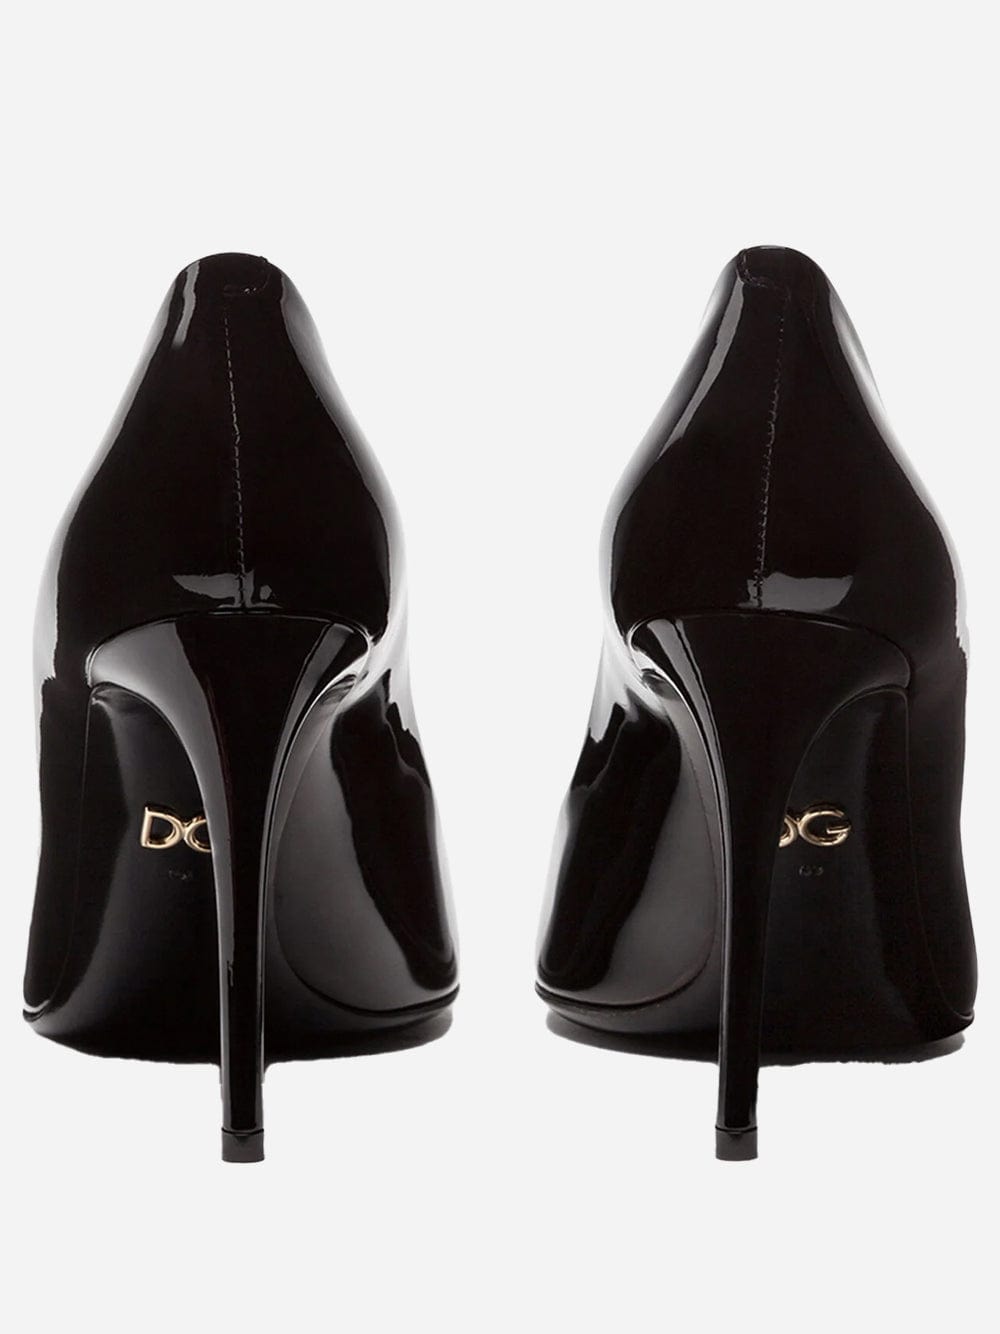 Dolce & Gabbana Polished Pointed-Toe Pumps